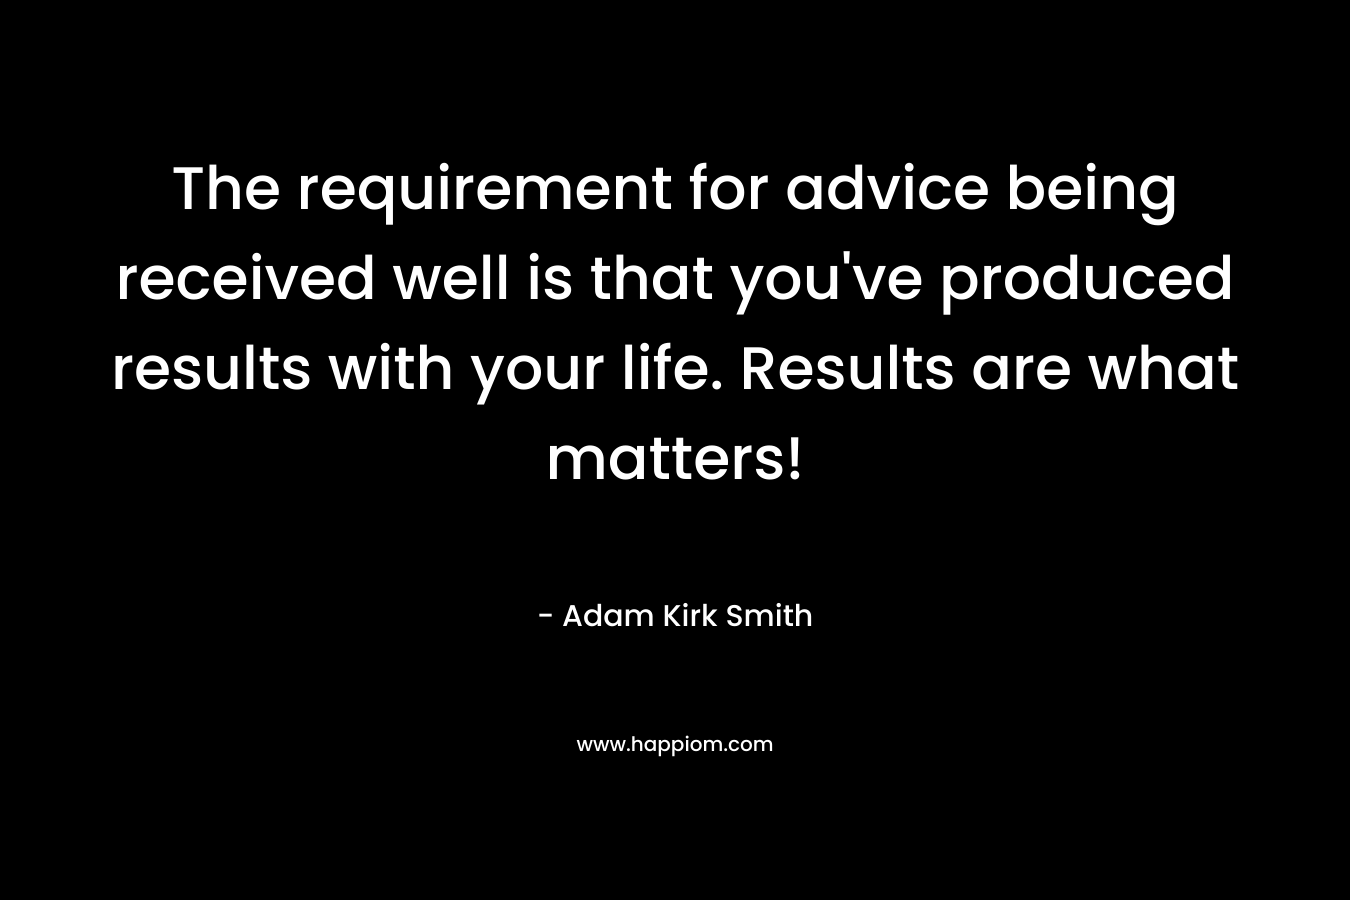 The requirement for advice being received well is that you’ve produced results with your life. Results are what matters! – Adam Kirk Smith